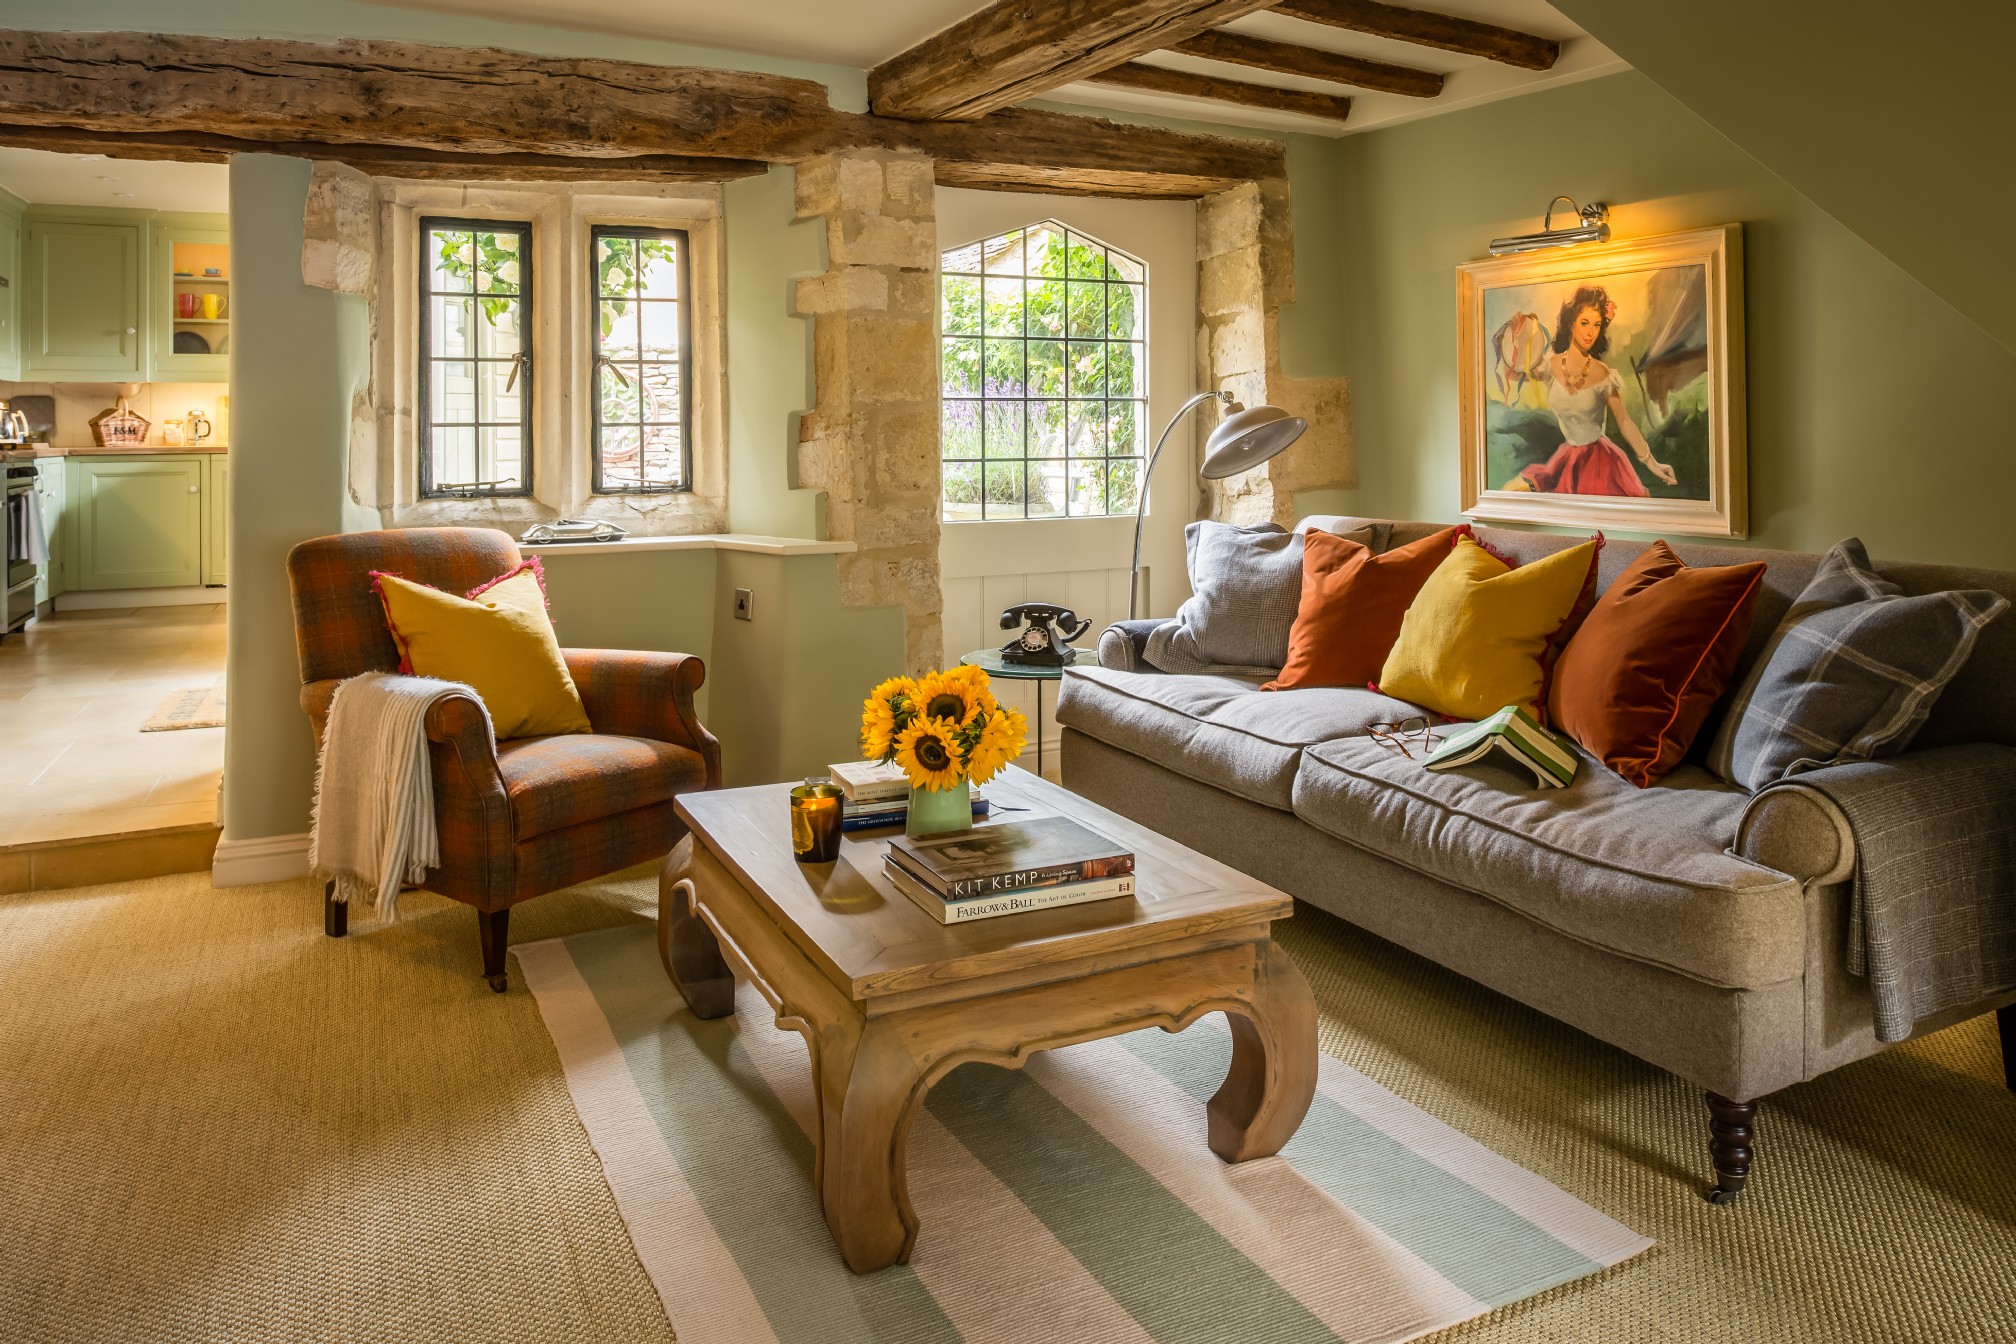 Little Scarlet Luxury Self Catering Cottage Burford Cotswolds